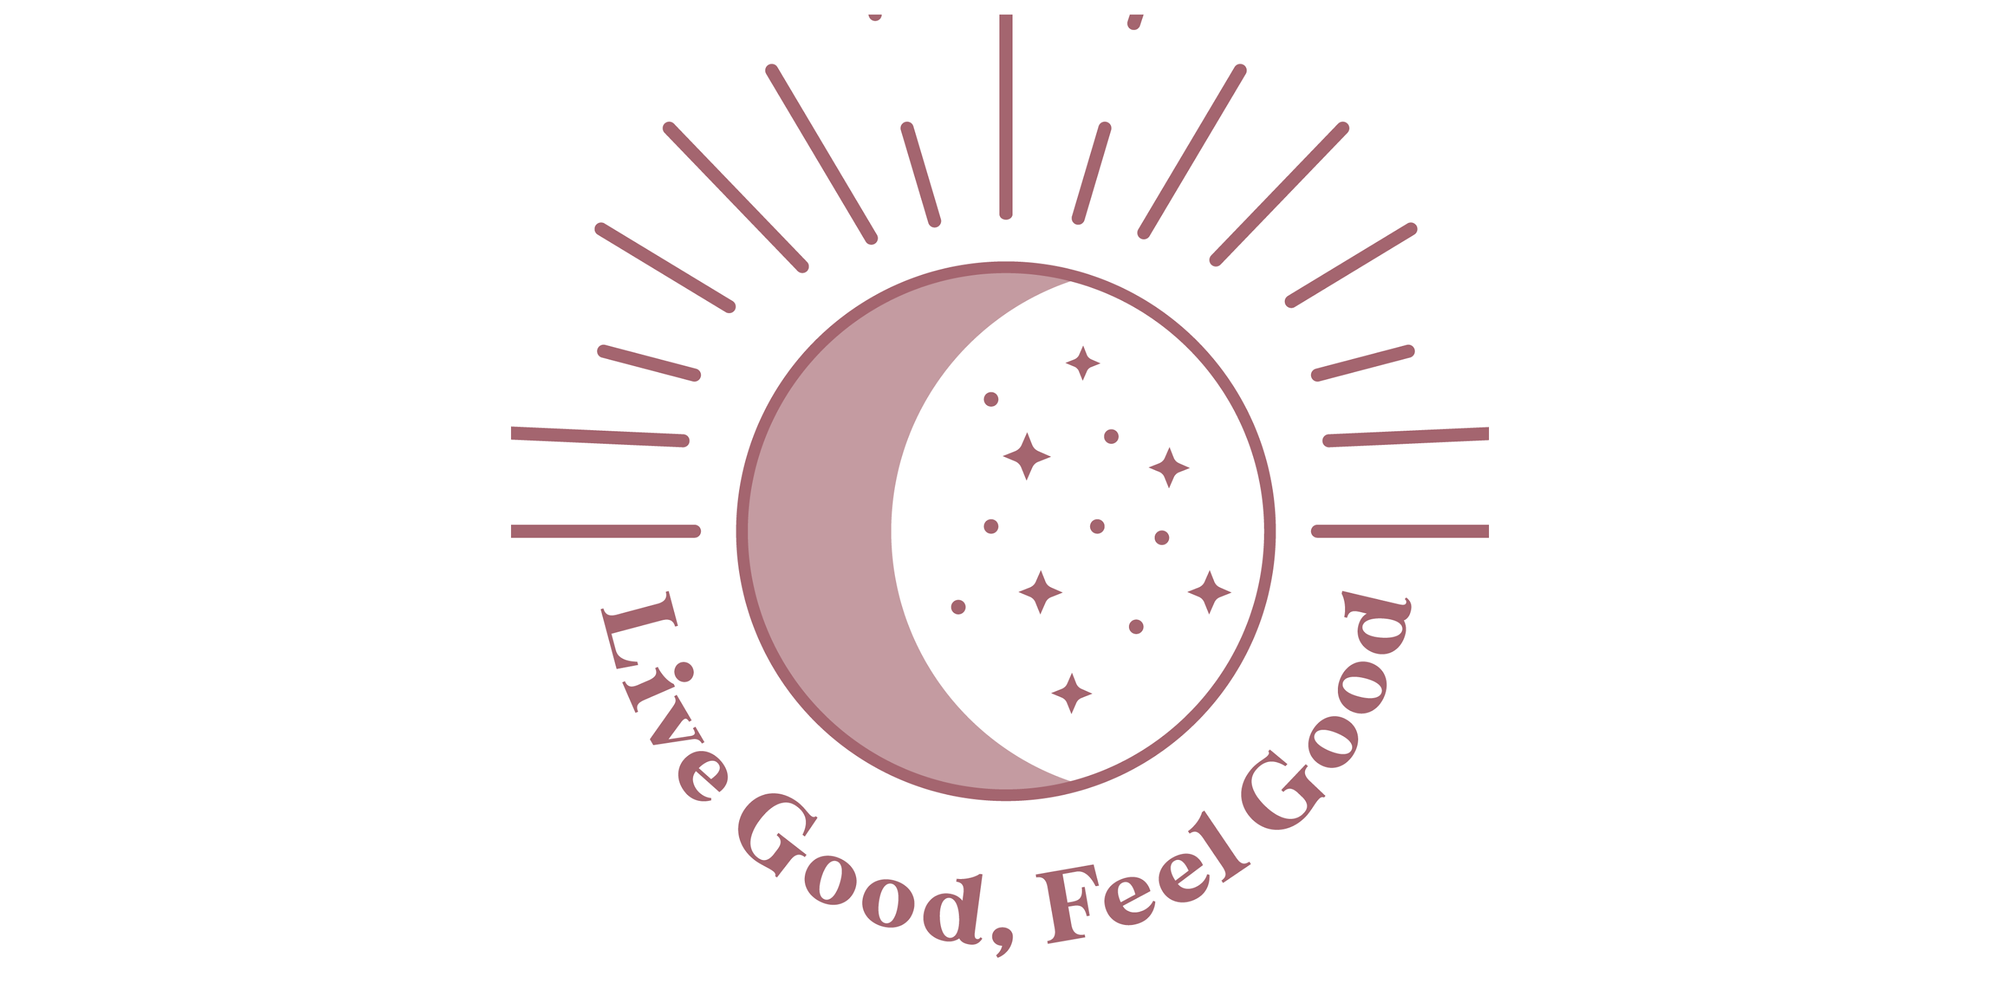 Feel Strong, Capable, and Confident - Live Good, Feel Good